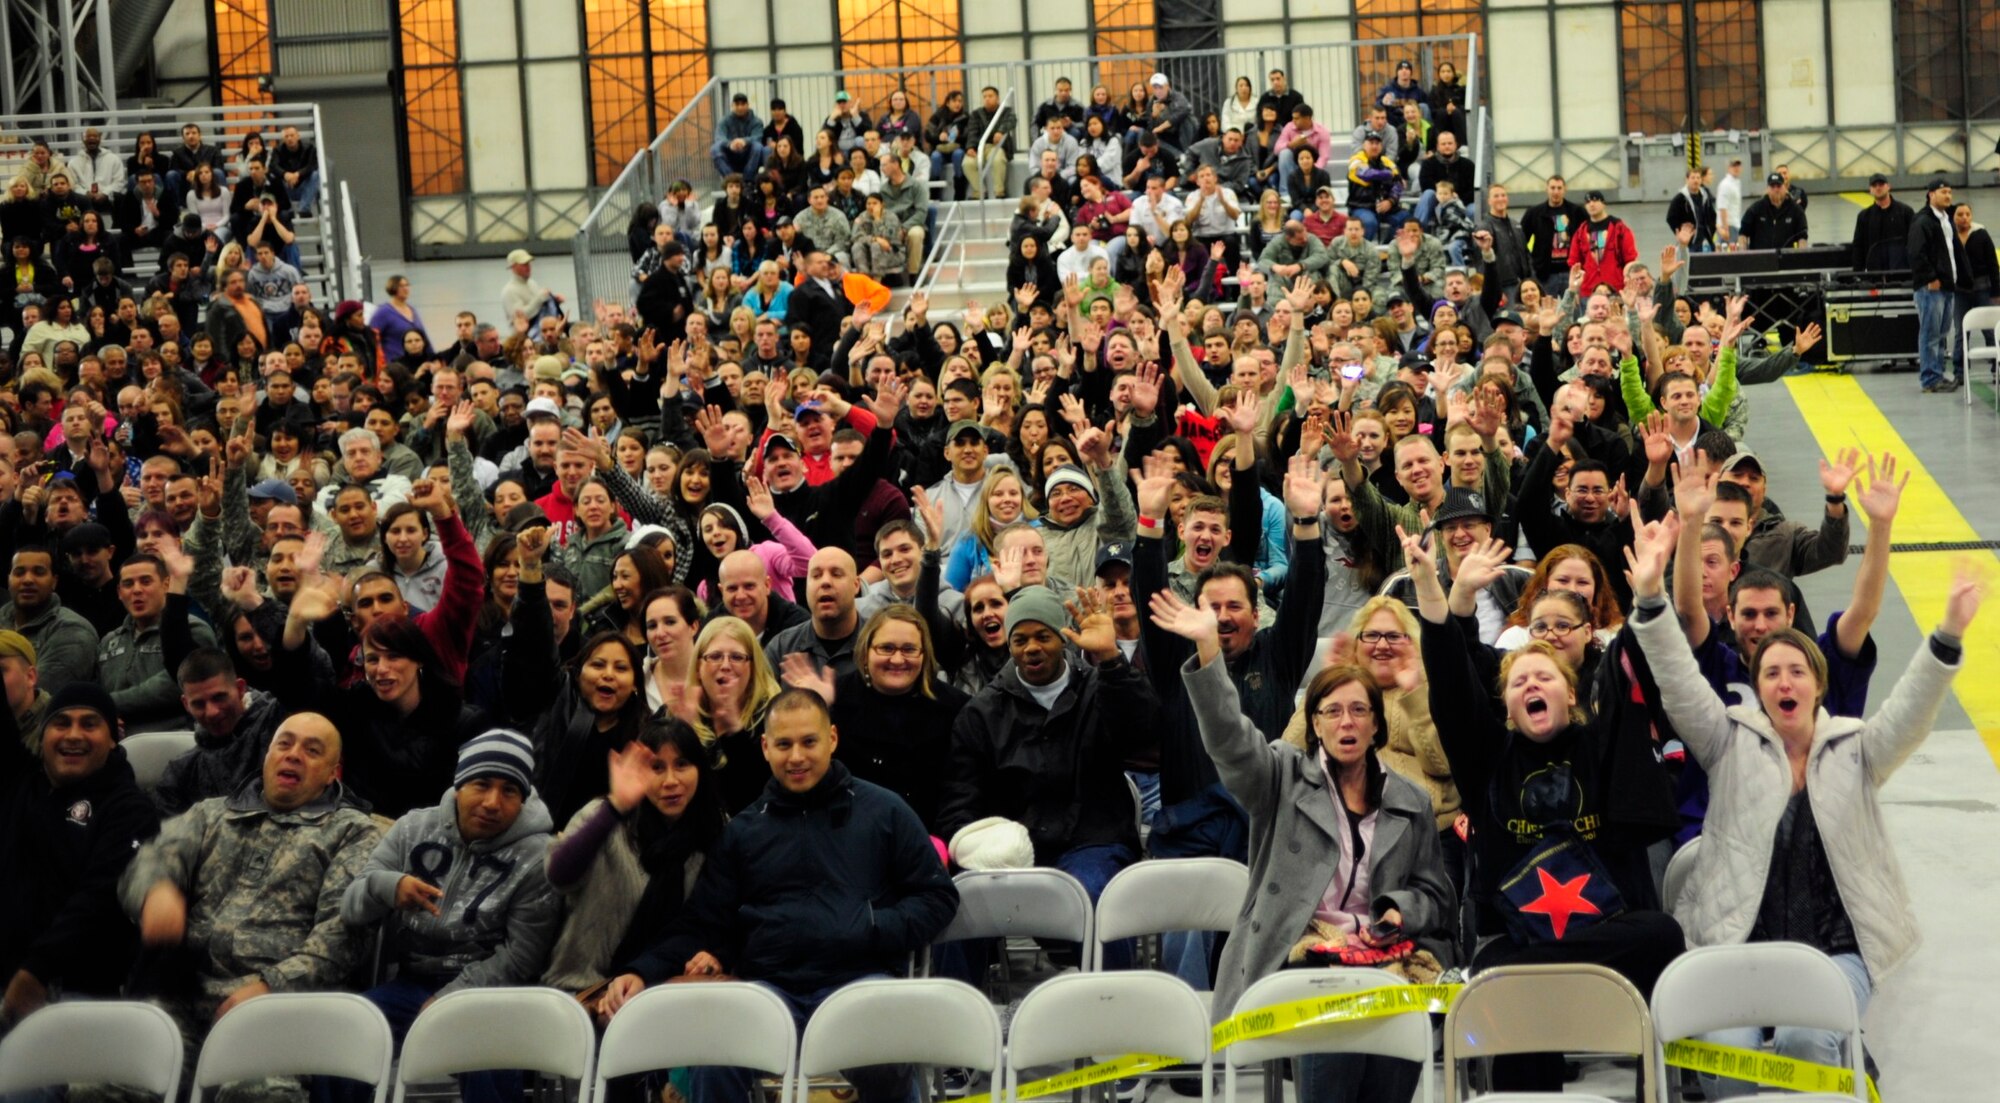 The crowd of more than 2,000 fans anxiously awaits the comedic performance of Carlos Mencia, the man behind Comedy Central's popular "Mind of Mencia" television program, Nov. 19. at McChord Field, Joint Base Lewis-McChord, Wash. (U.S. Air Force photo/Airman Leah Young)